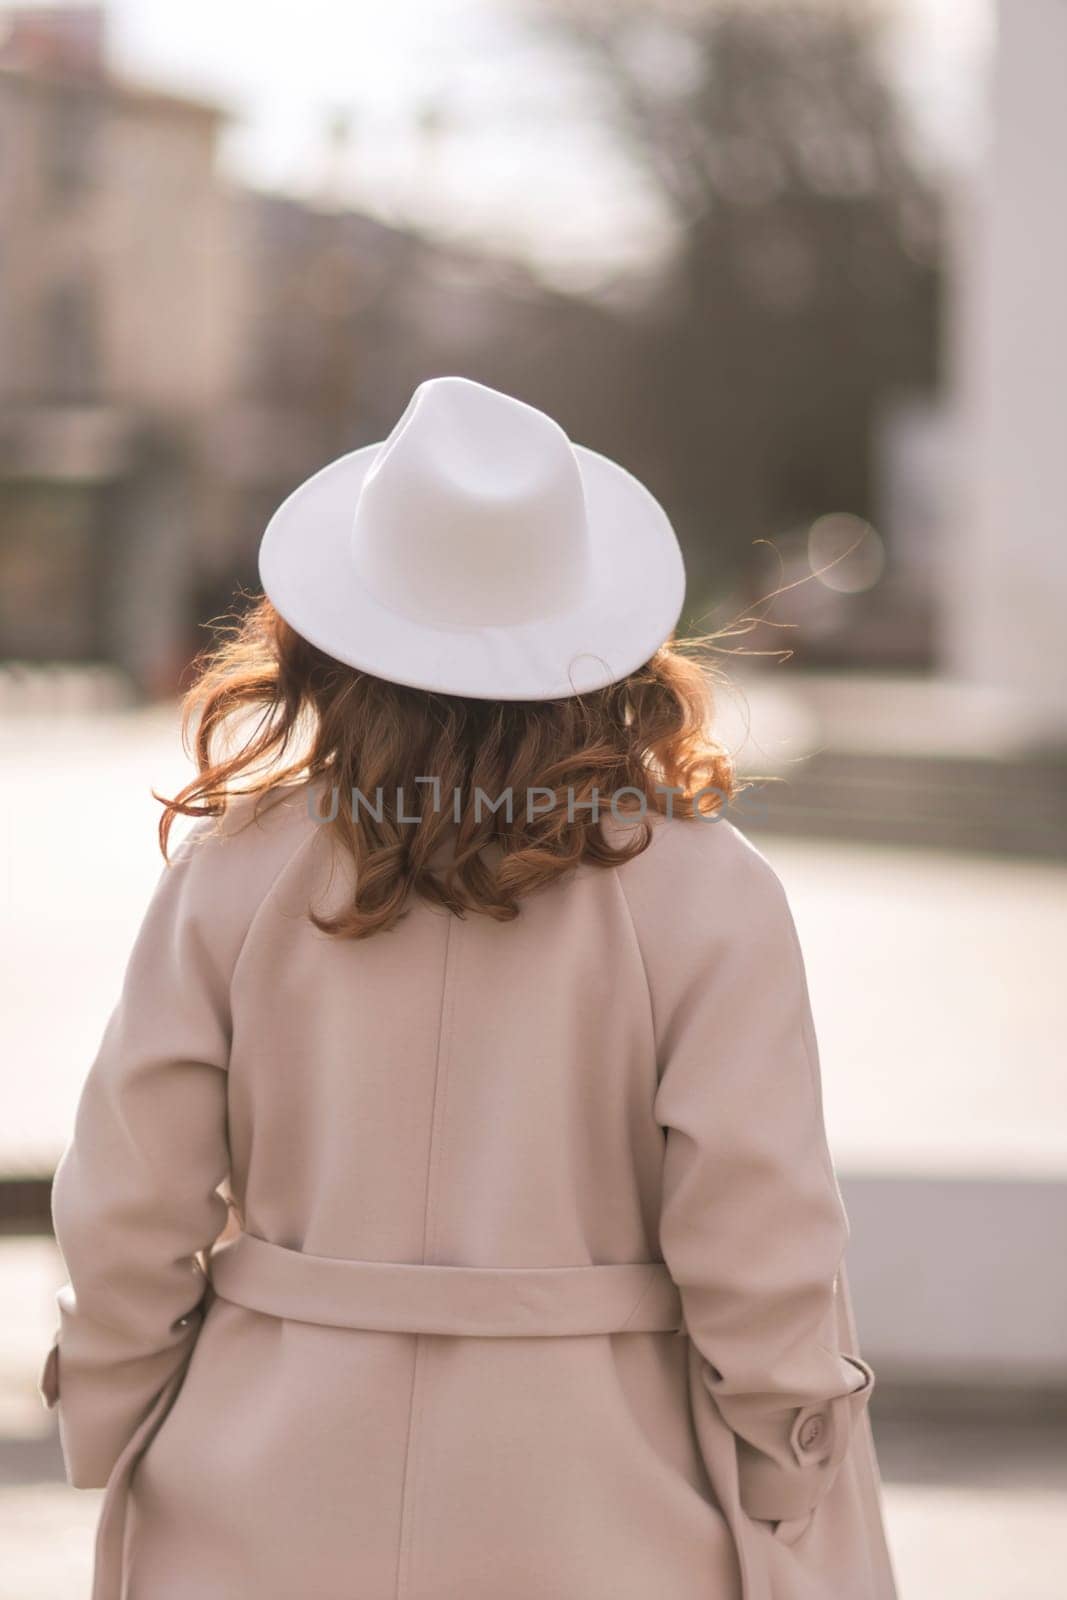 Back view of happy woman wearing hat and coat walking down street on sunny spring day. People, lifestyle, travel and vacations concept by Matiunina